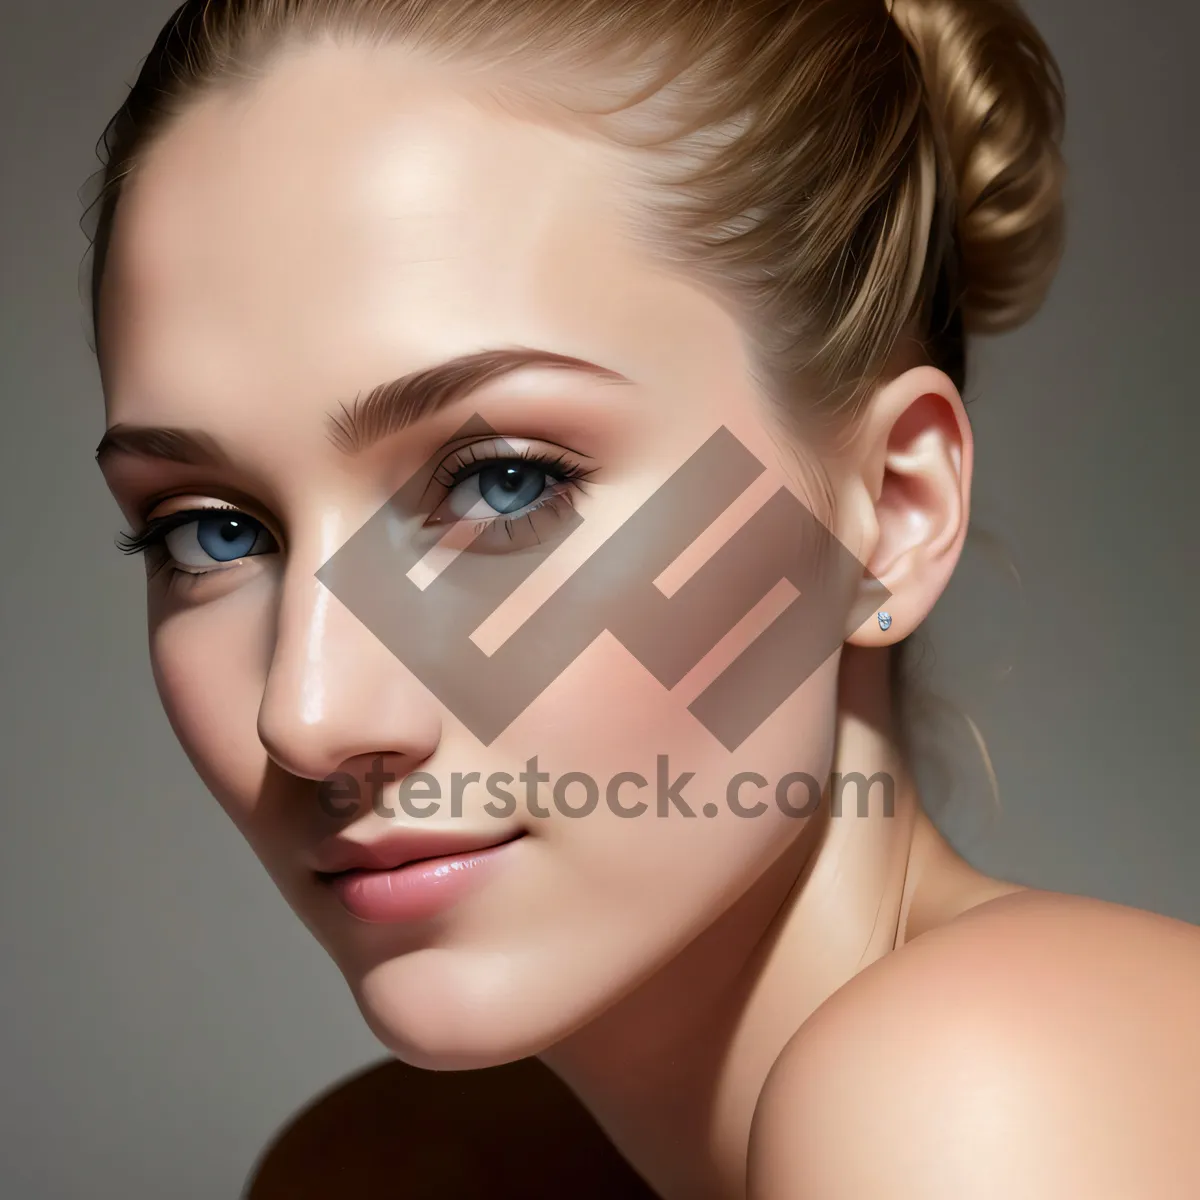 Picture of Stunning Portrait of an Attractive Fashion Model